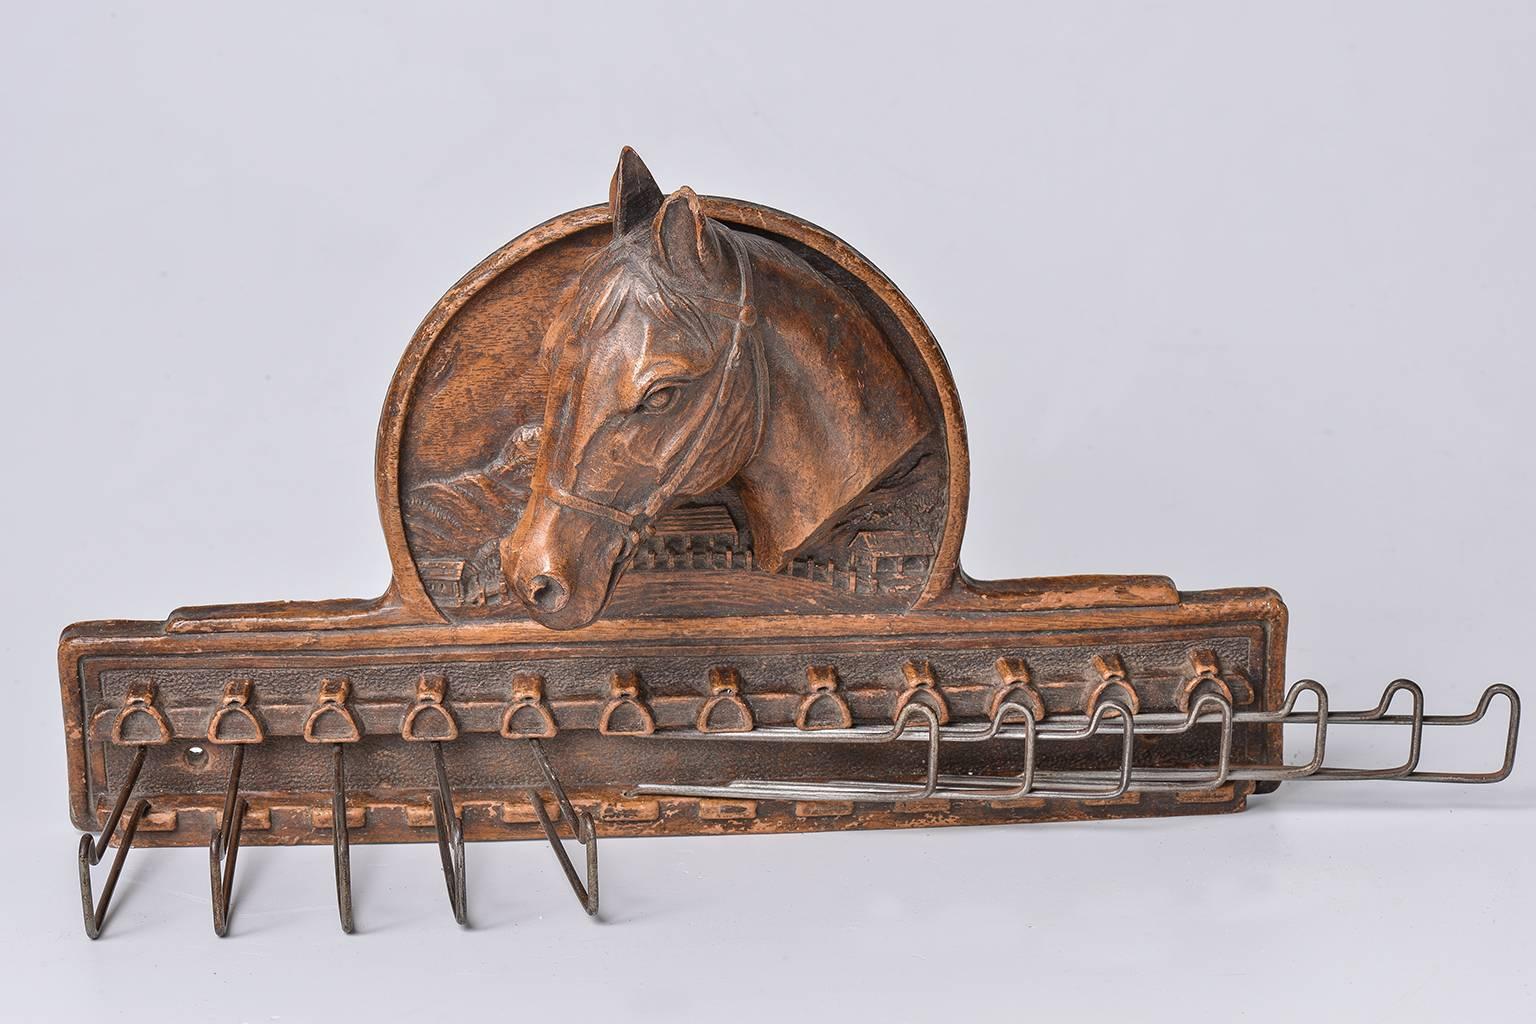 Vintage rare American tie rack with horse head, very elegant in a men's wardrobe.
It may be also a belt holder !  An idea for a gift -
Signed: Syrocowood, Syracuse, NY, USA
O/3779 -